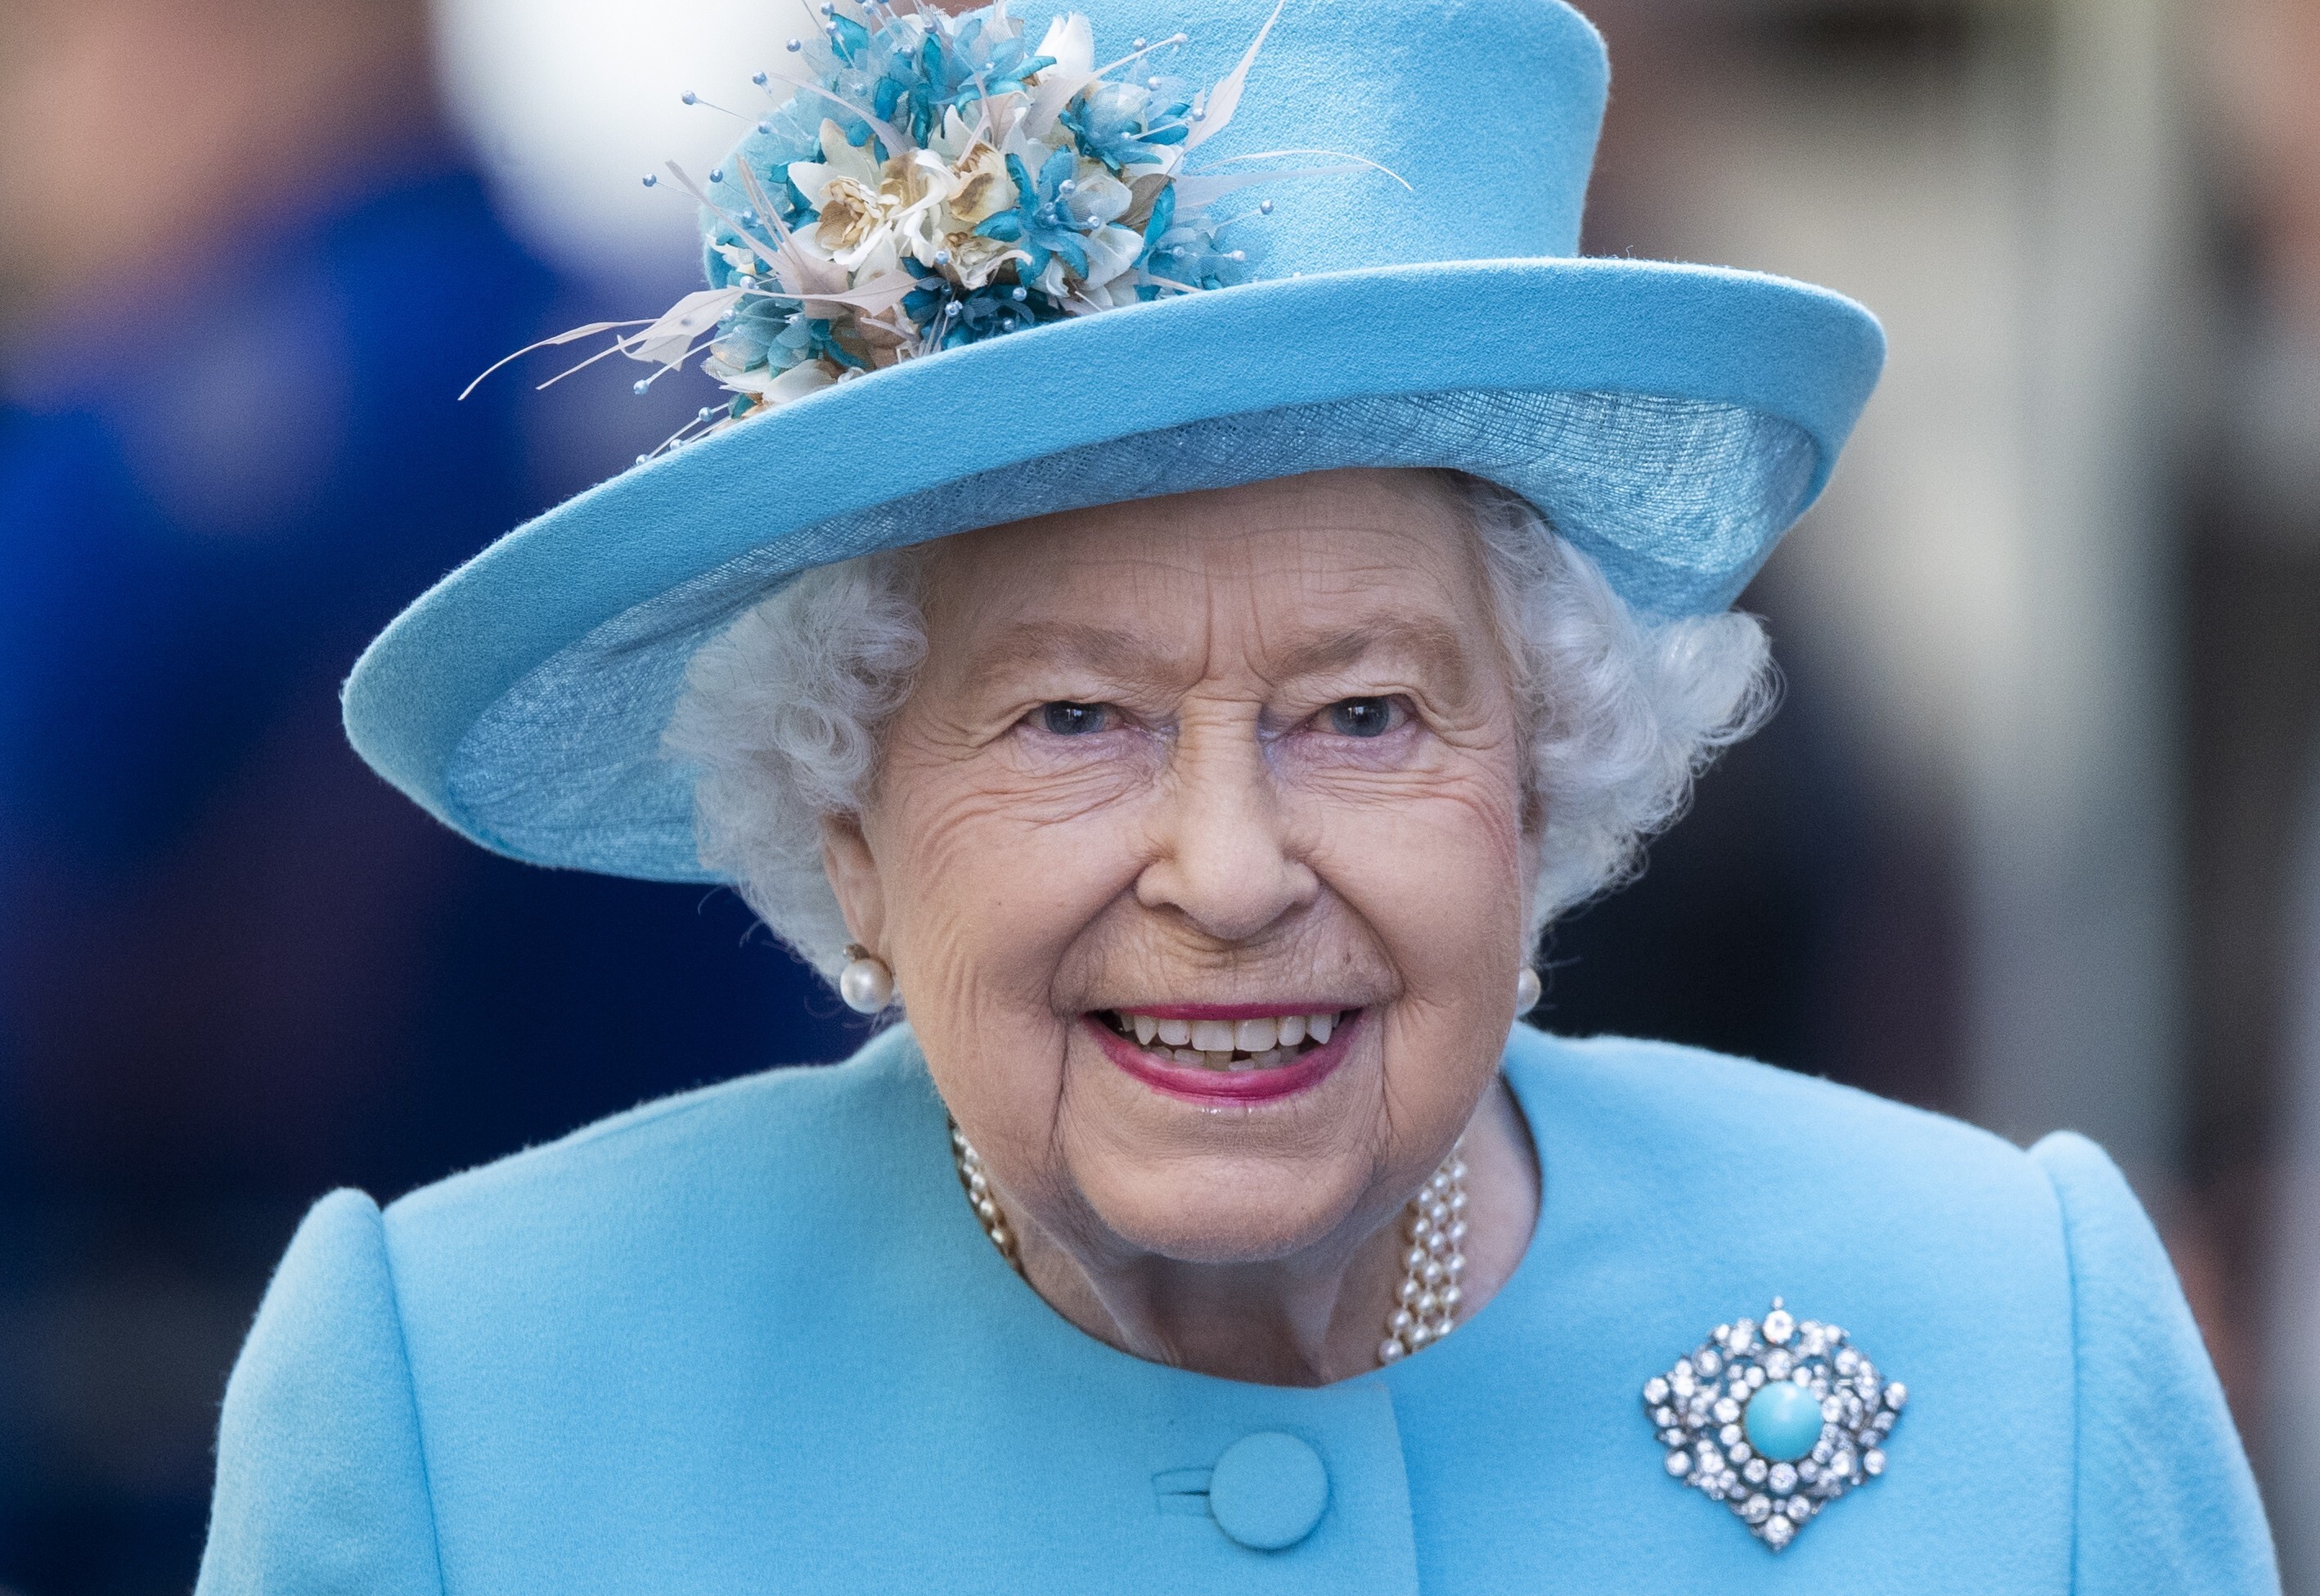 The Queen's Diamond and Pearl Leaf Brooch